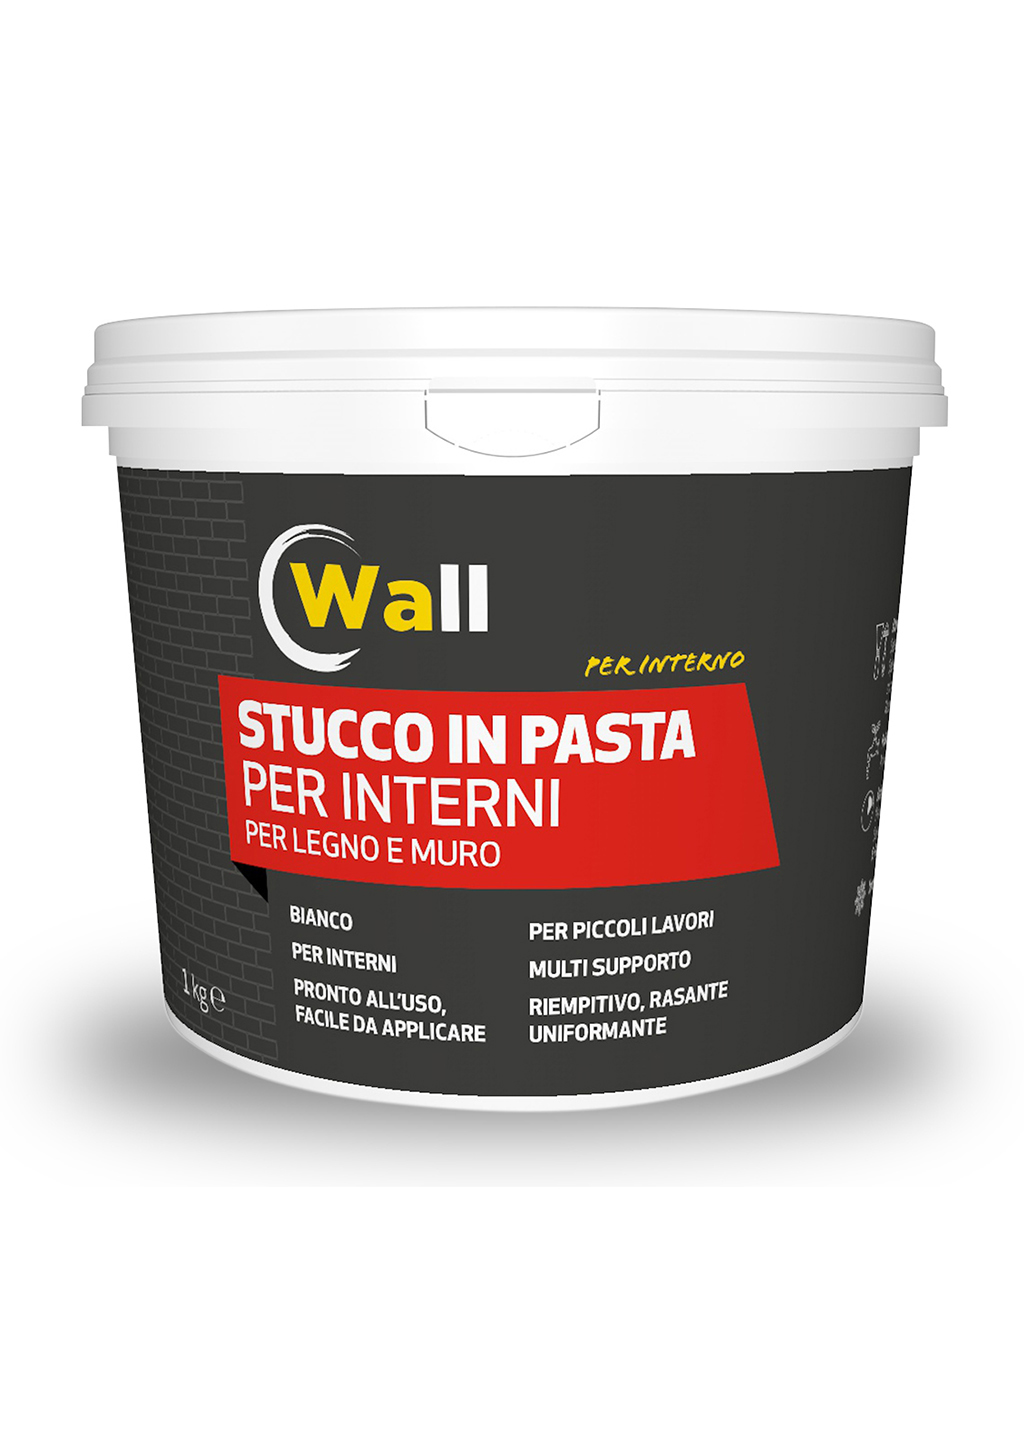 Stucco in pasta wall 